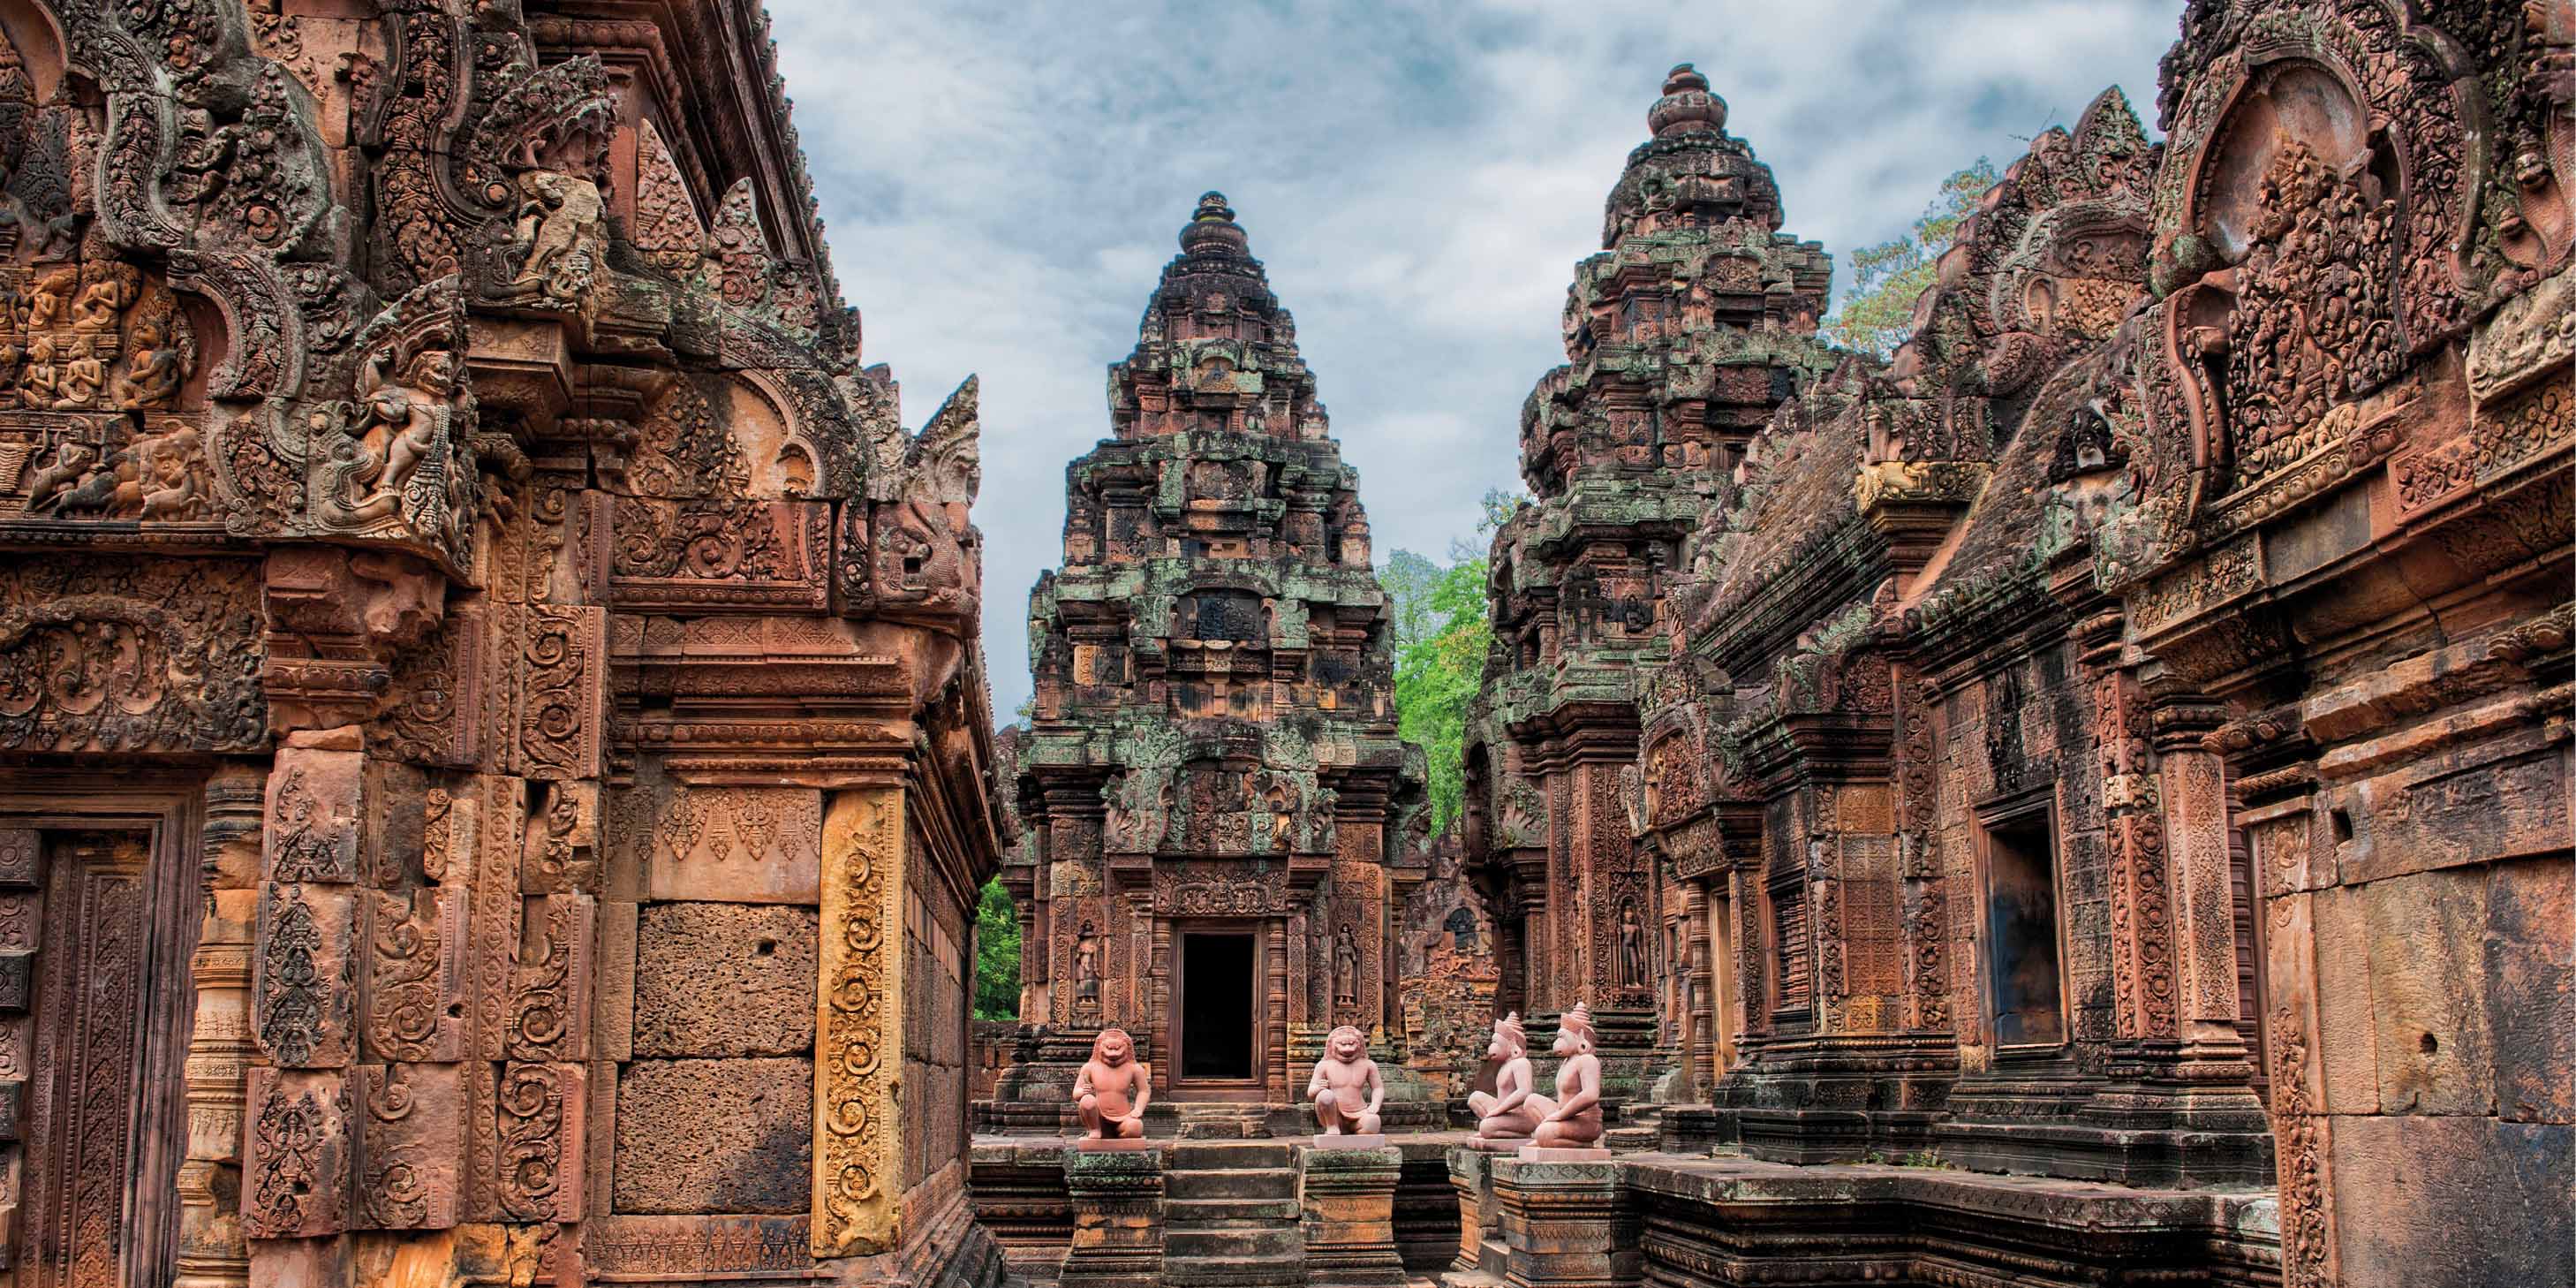 Weathered temples, statues, and monuments located in Siem Reap’s Angkor Wat temple district, Cambodia